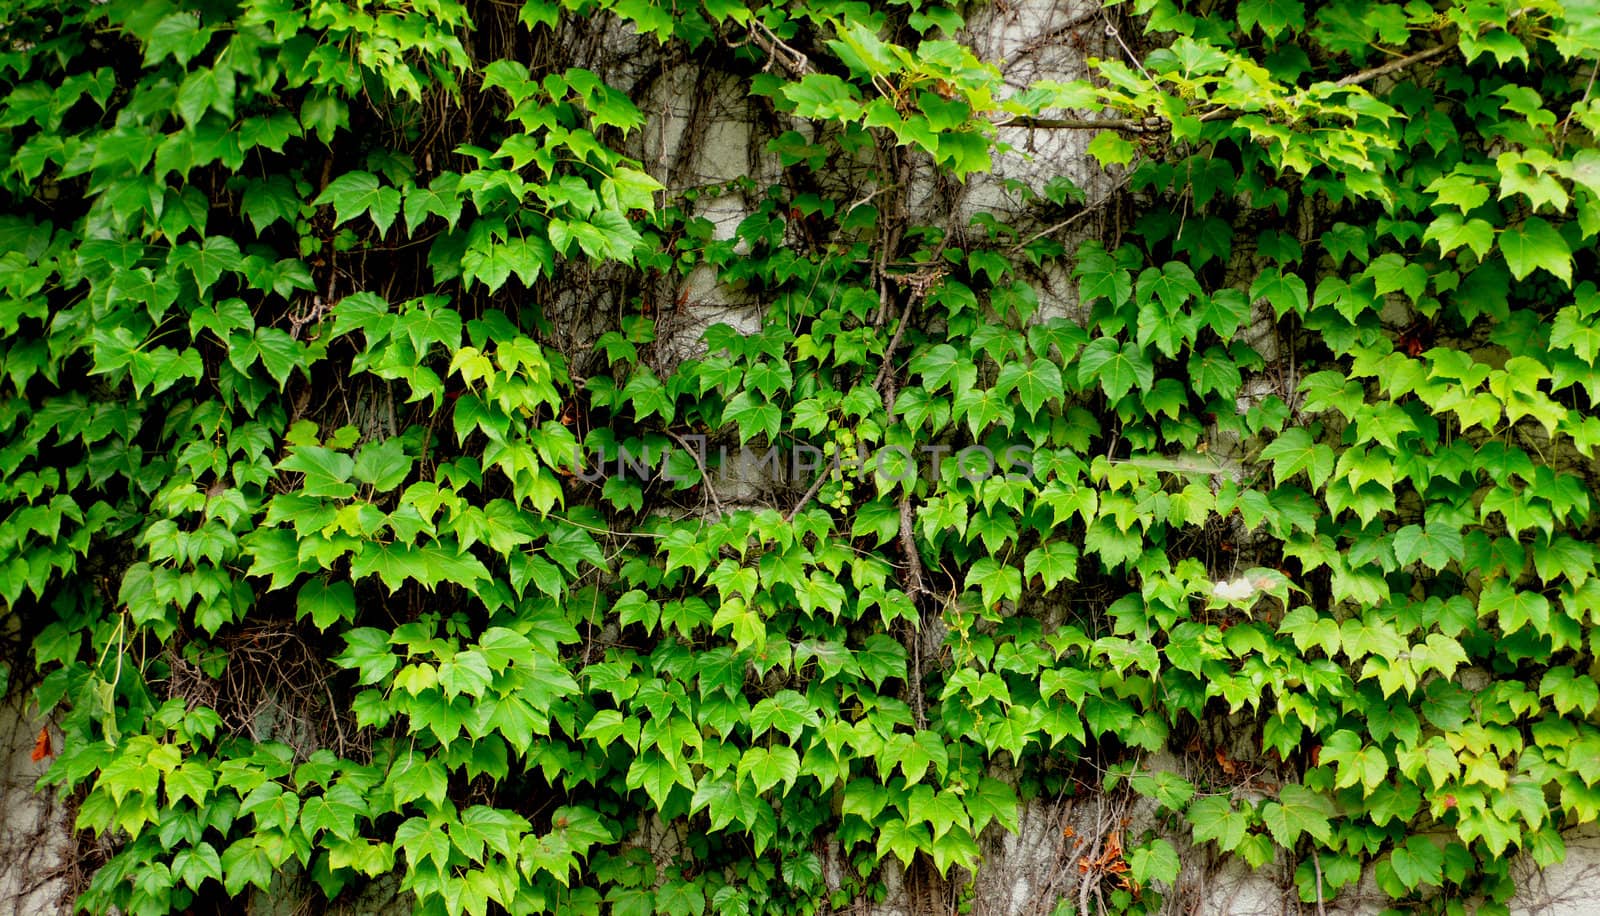 old wall covered by fresh green ivy branches and leaves